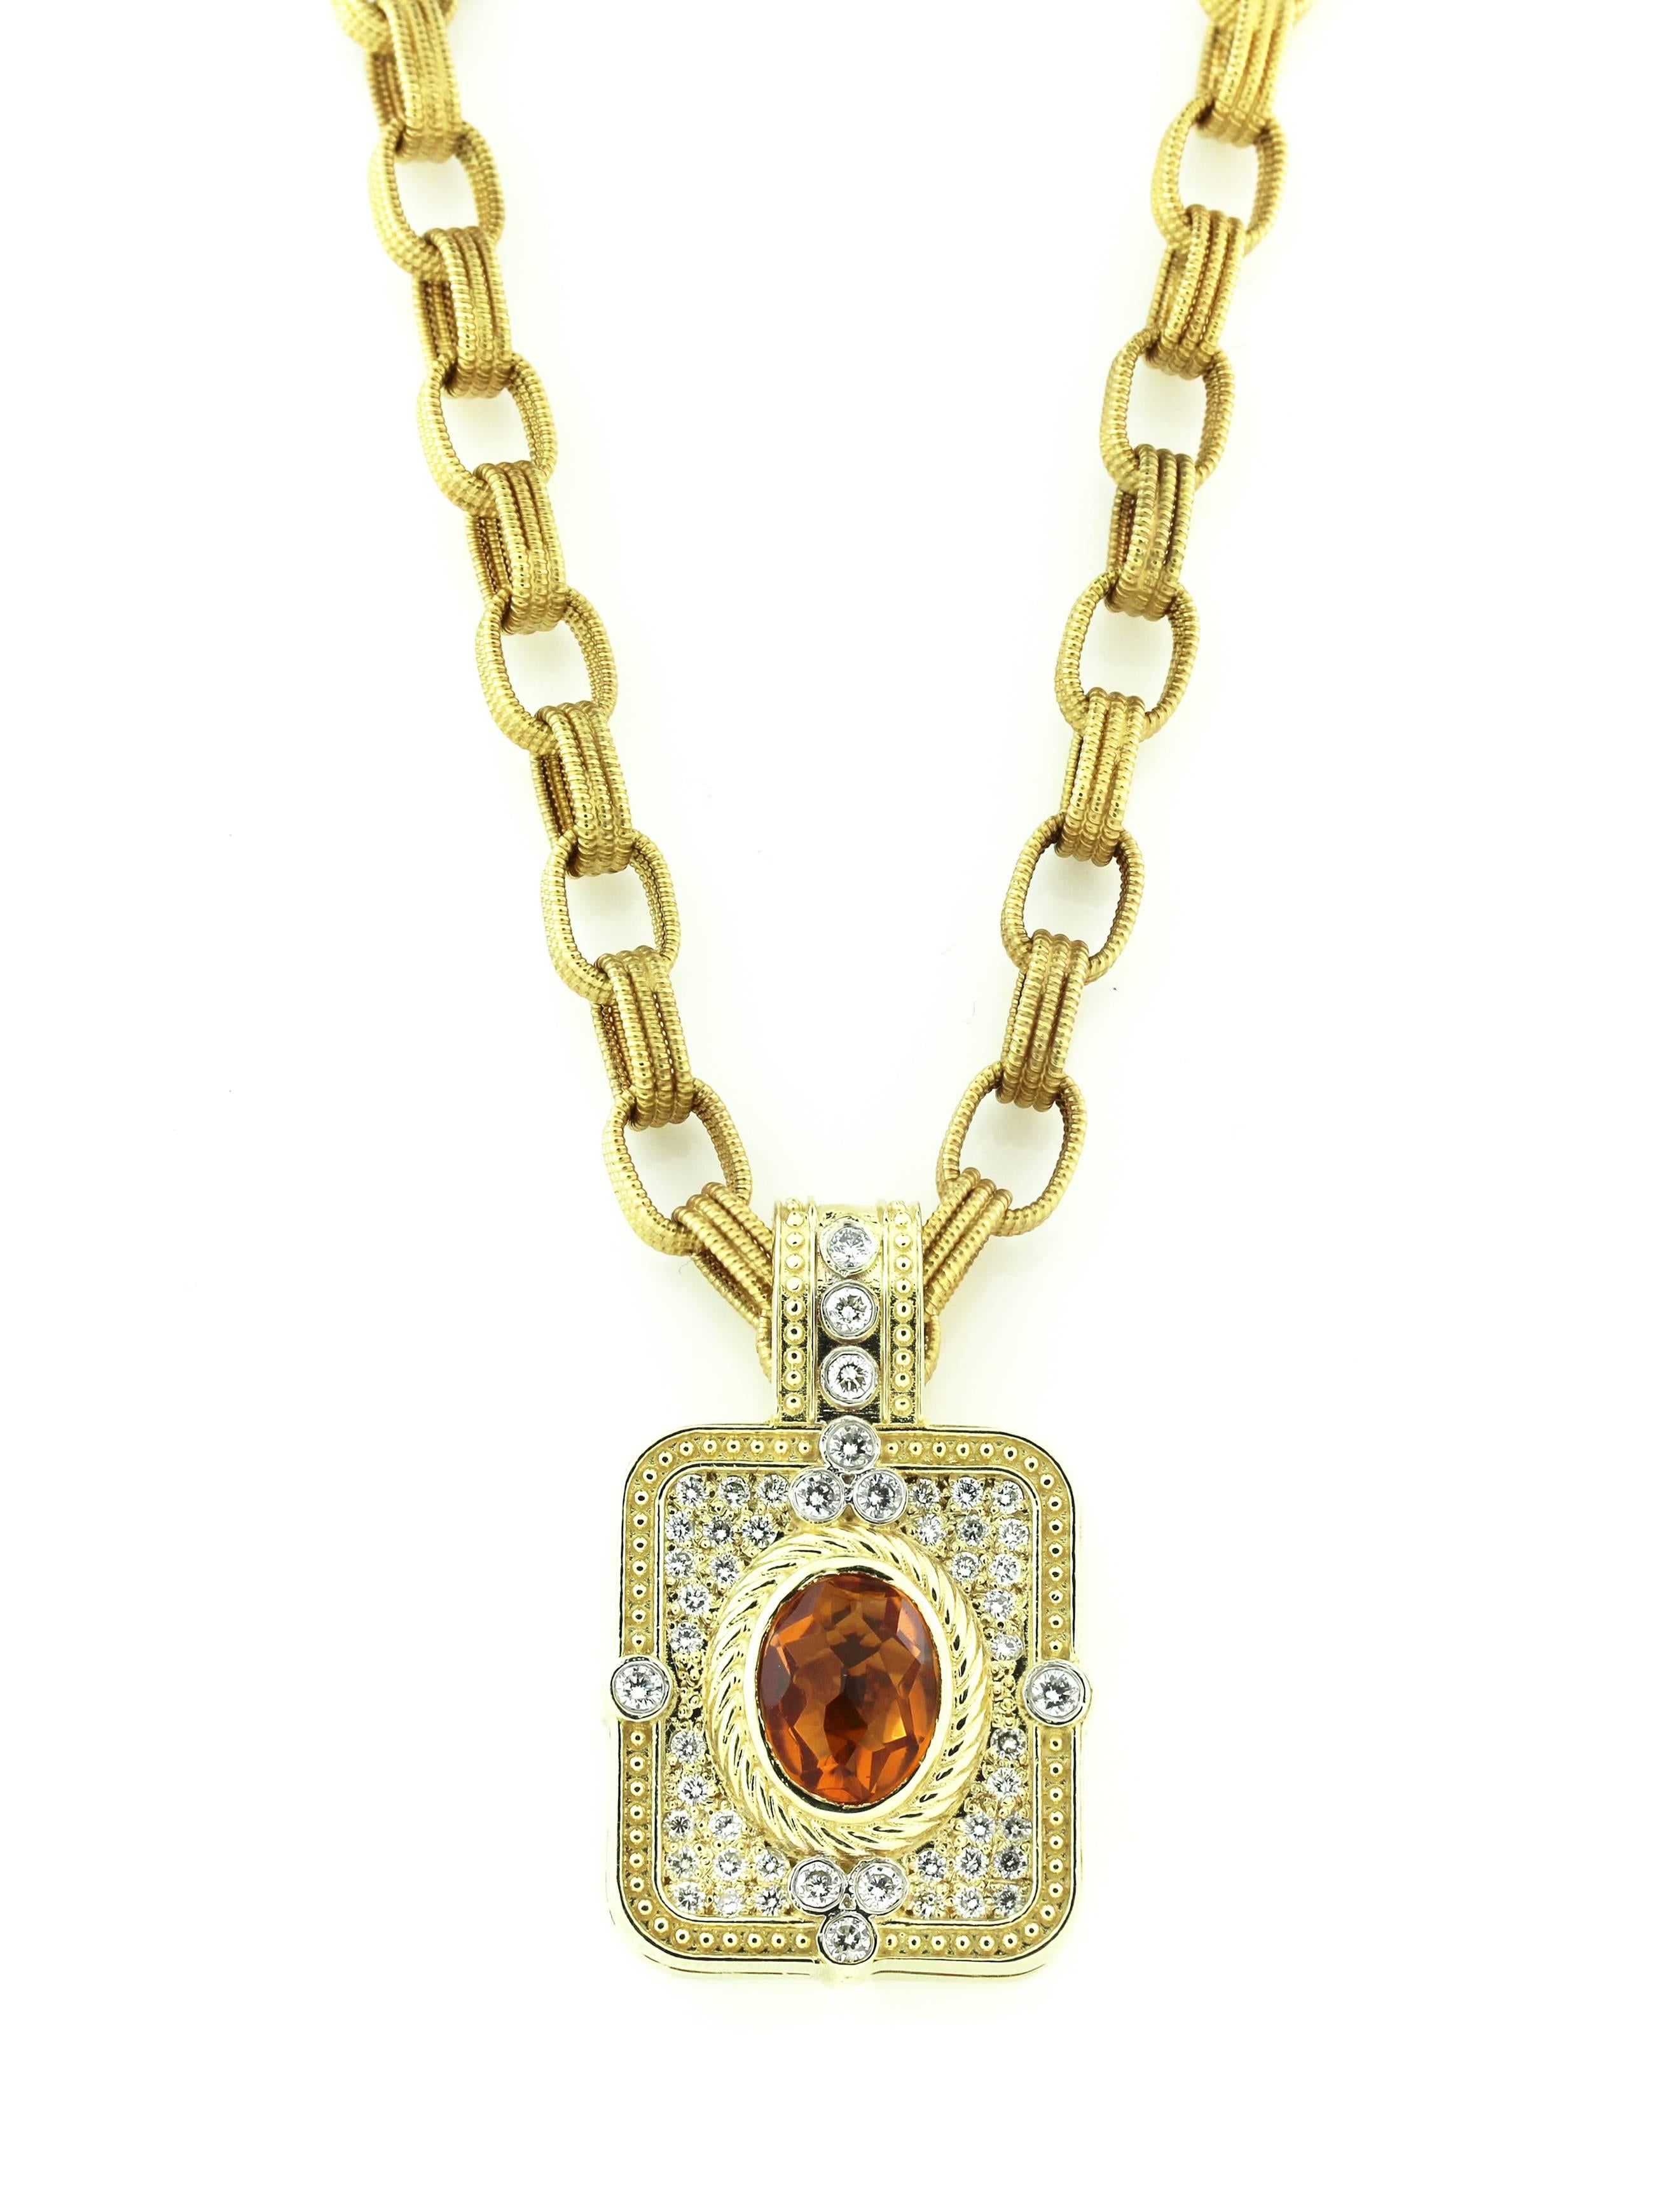 14K Gold Necklace with Enhancer Pendant and yellow gold link chain

Pendant has Citrine center and all diamonds. The citrine is 11mm x 9.5mm and is gorgeous in color. The pendant also has 1.50 carat G color, VS clarity diamonds

The pendant bail